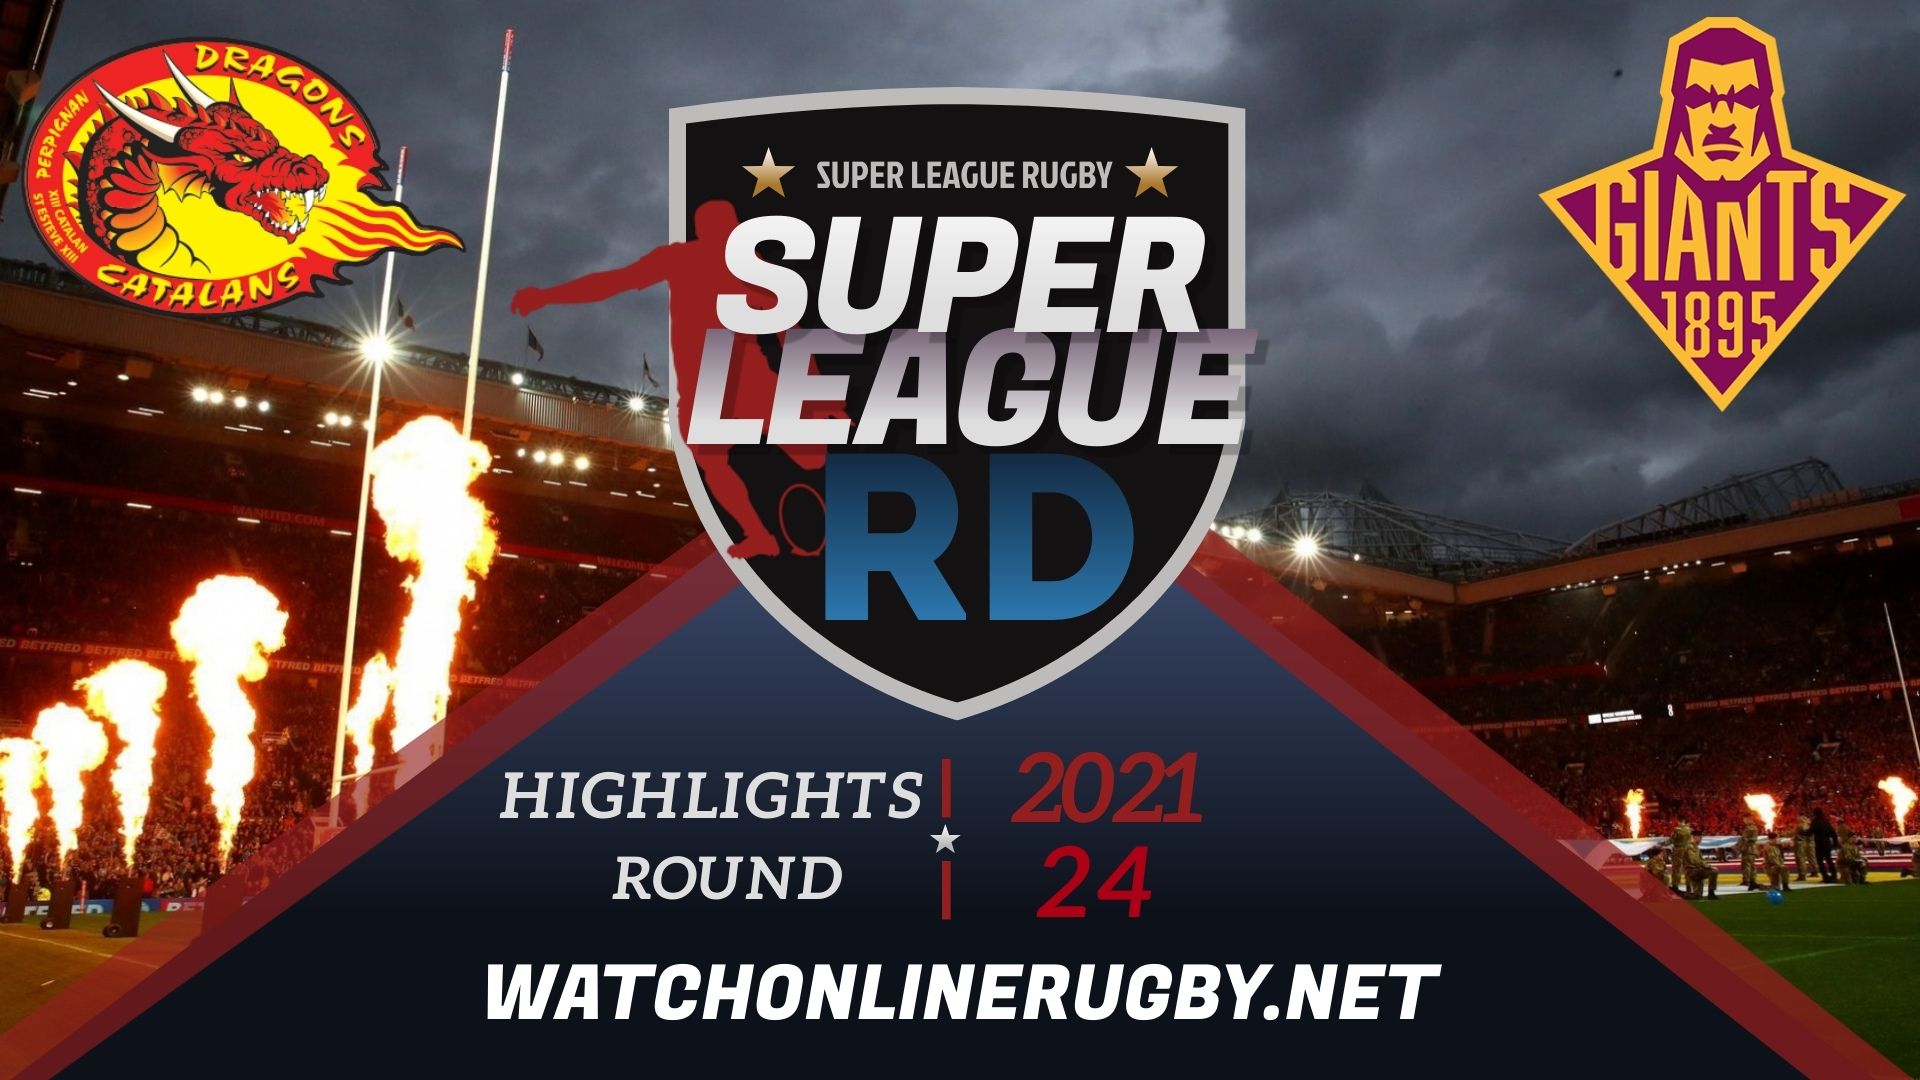 Catalans Dragons Vs Huddersfield Giants Super League Rugby 2021 RD 24